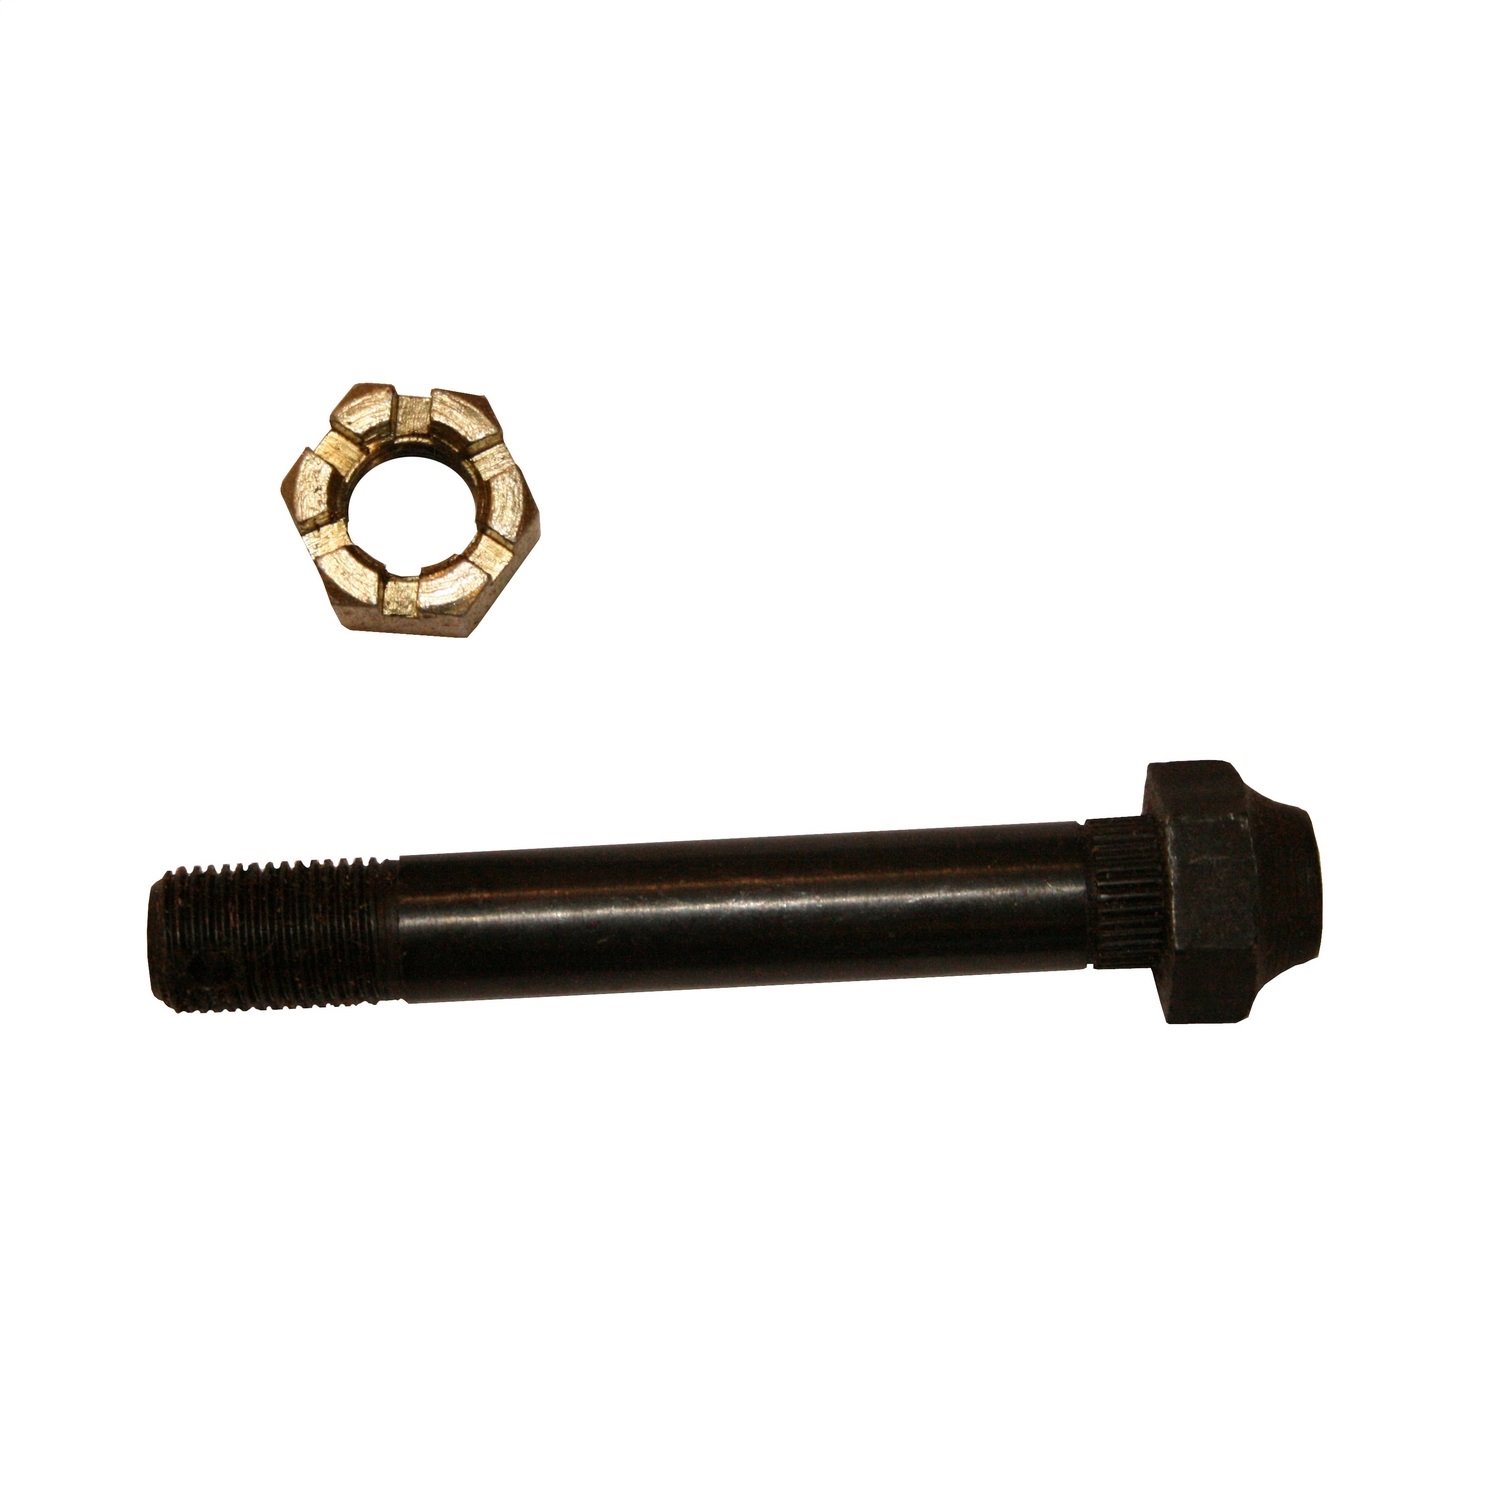 medium replacement front torque reaction bolt and nut from Omix-ADA, Fits 41-45 Willys MBs and Ford GPWs.